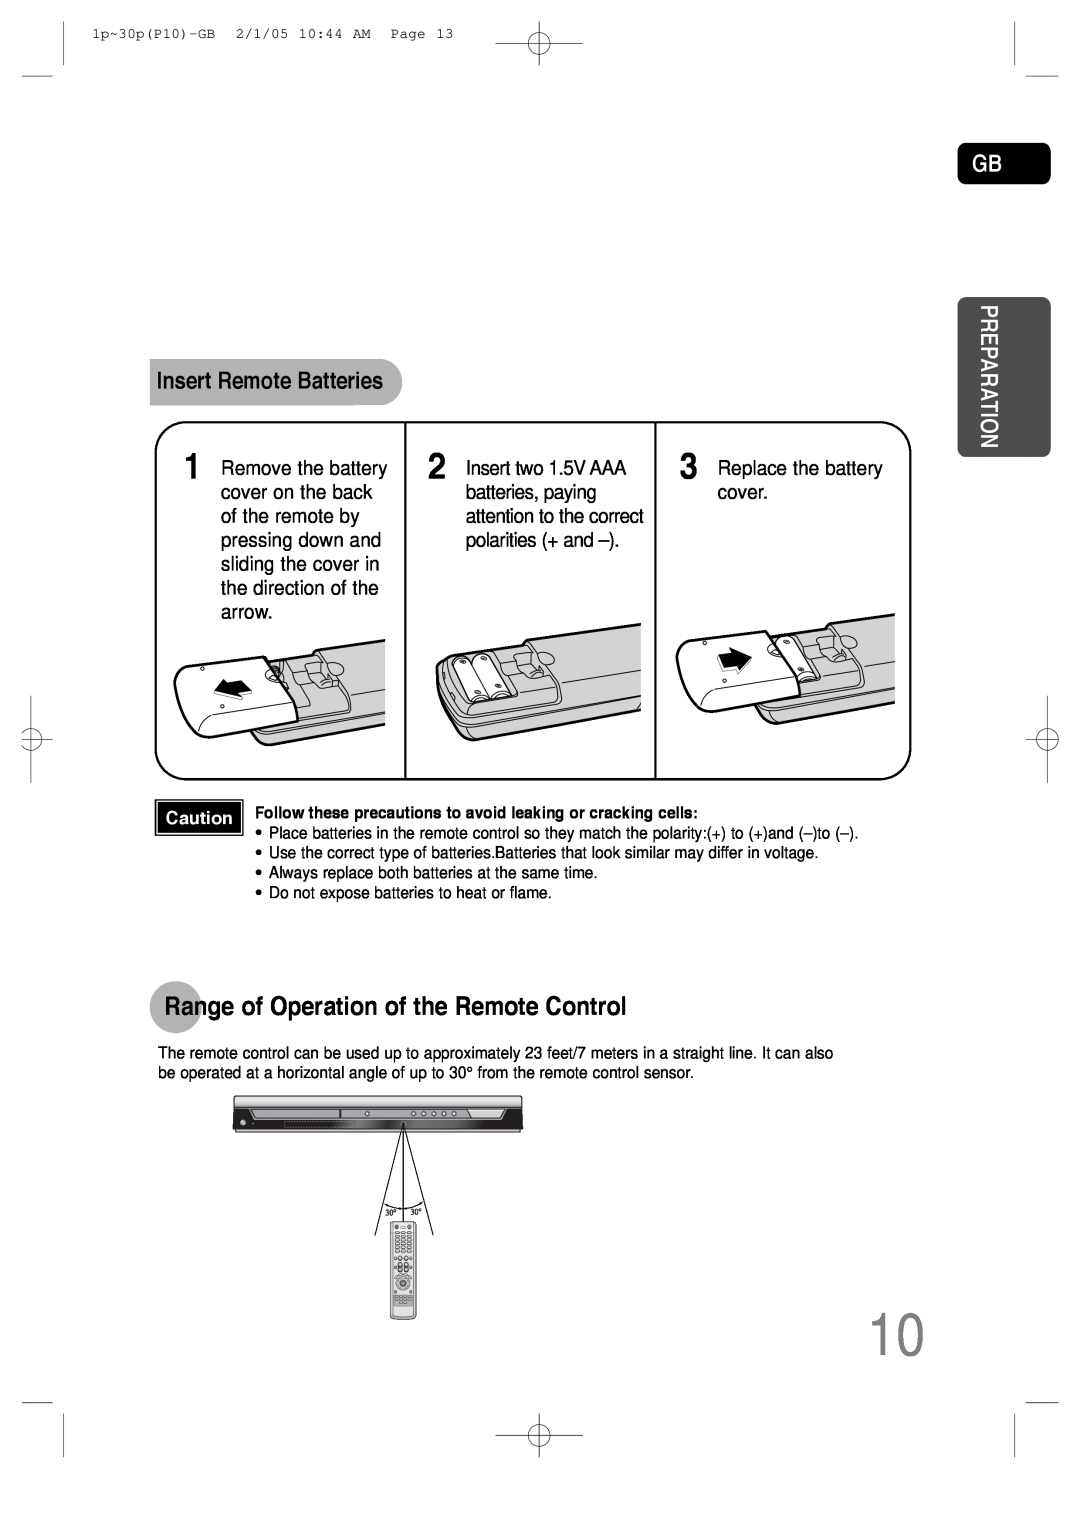 Samsung P10 instruction manual Range of Operation of the Remote Control, Insert Remote Batteries, Preparation 